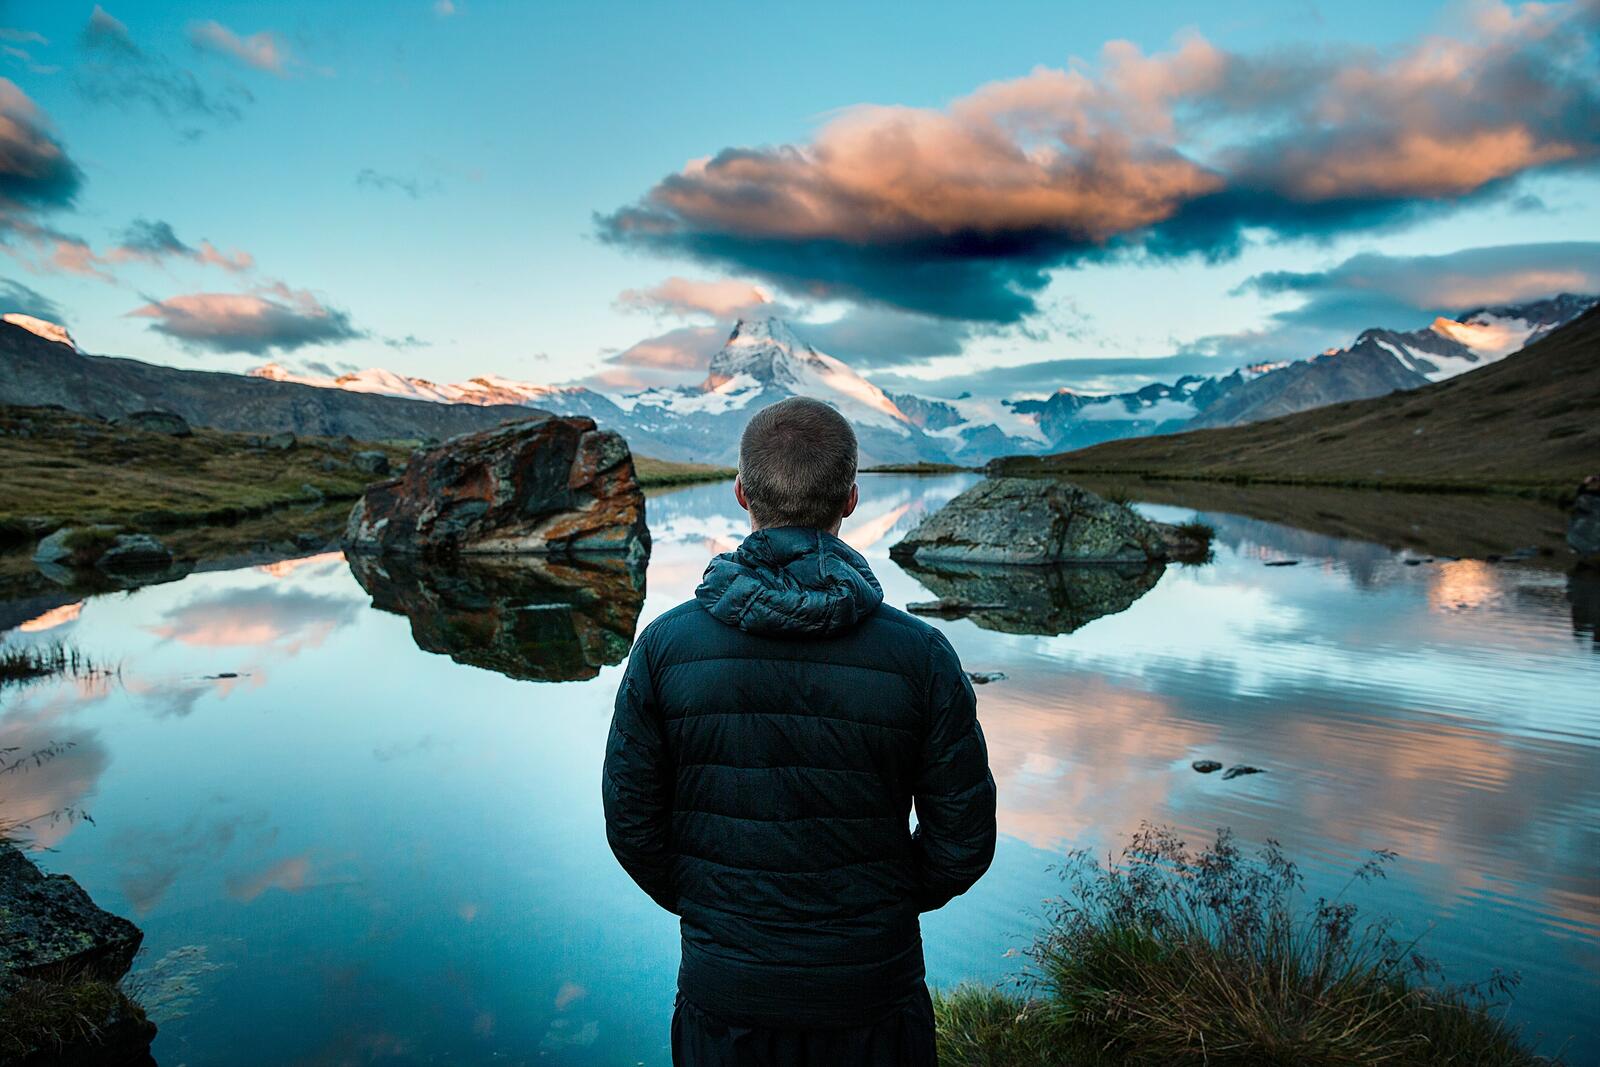 Free photo A man stands by a lake in the mountains and looks out into the distance